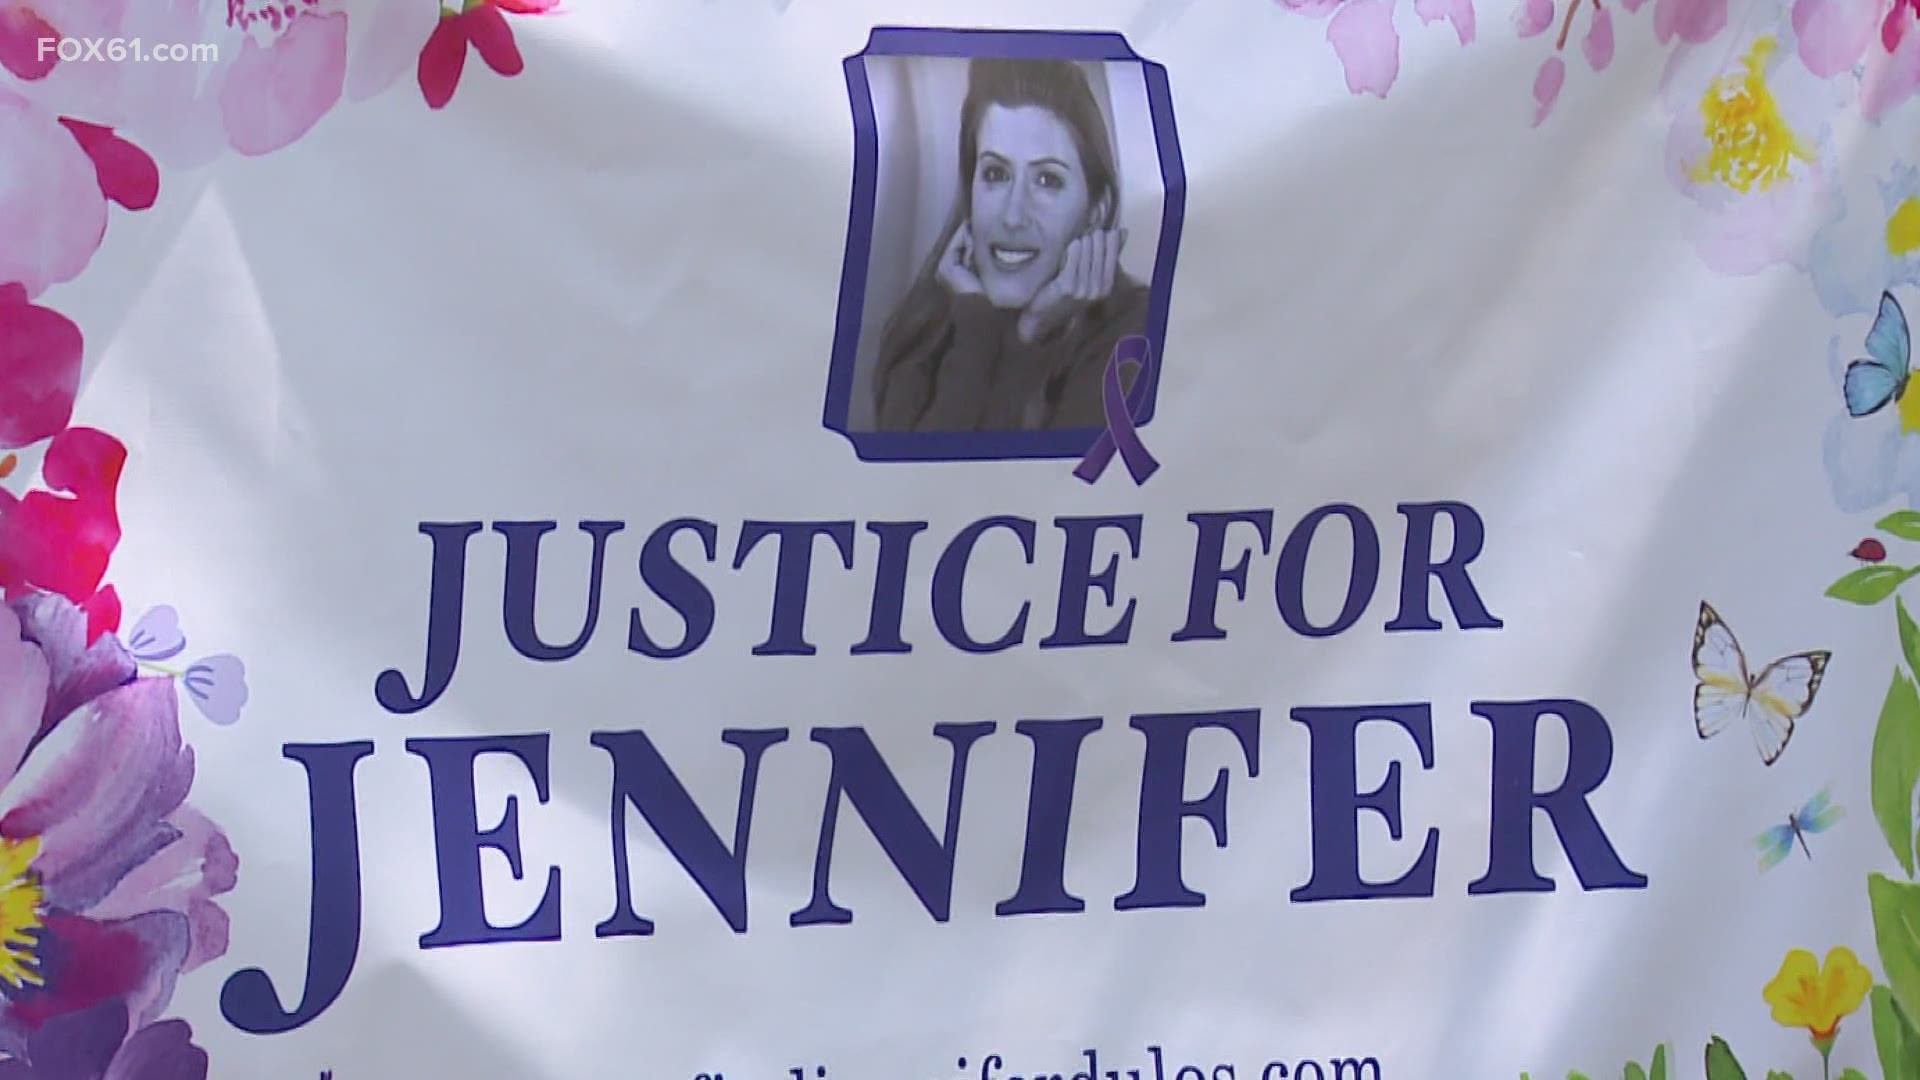 The group made a memorial for Jennifer Dulos last year and has added other victims of domestic violence.